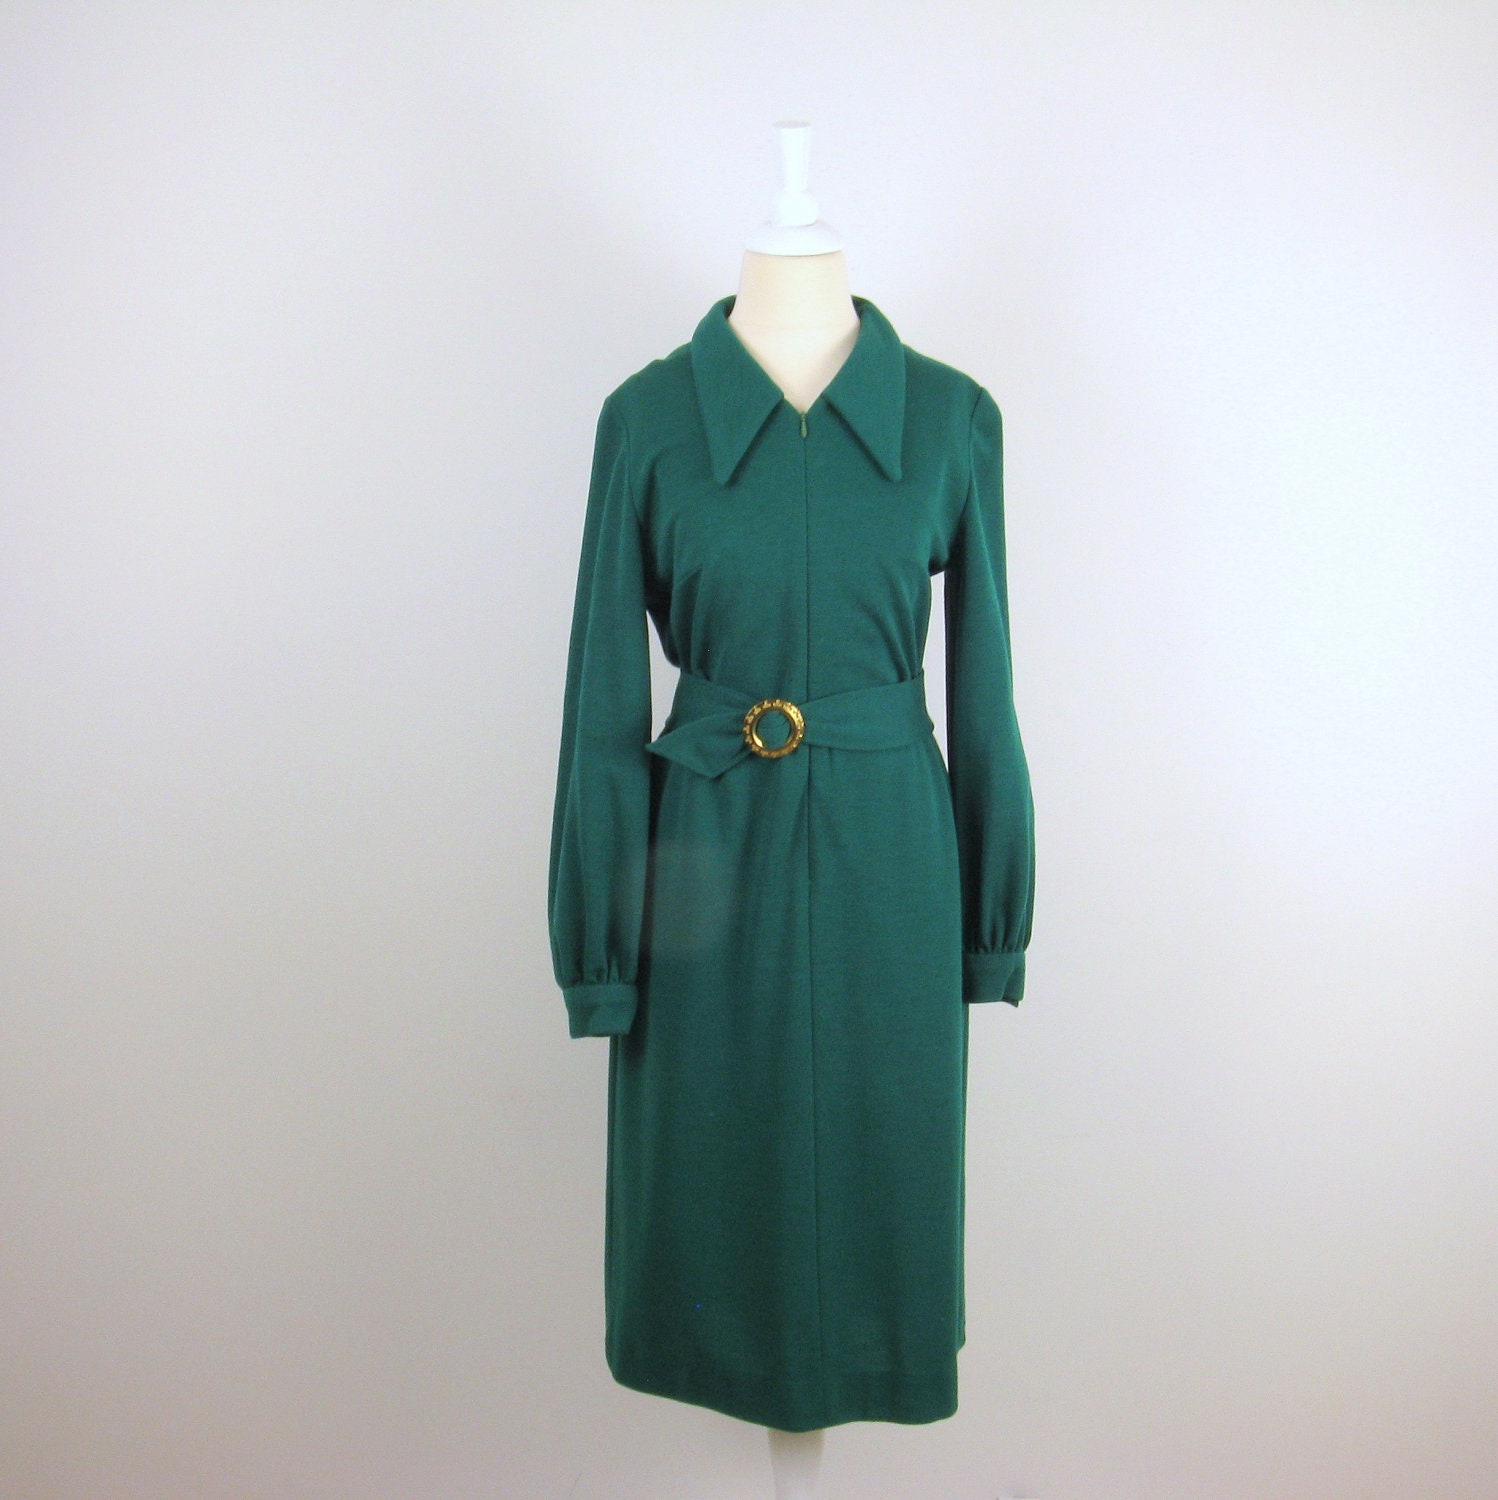 Vintage 1960s Belted Dress in Emerald Green Knit - Small - TwoMoxie